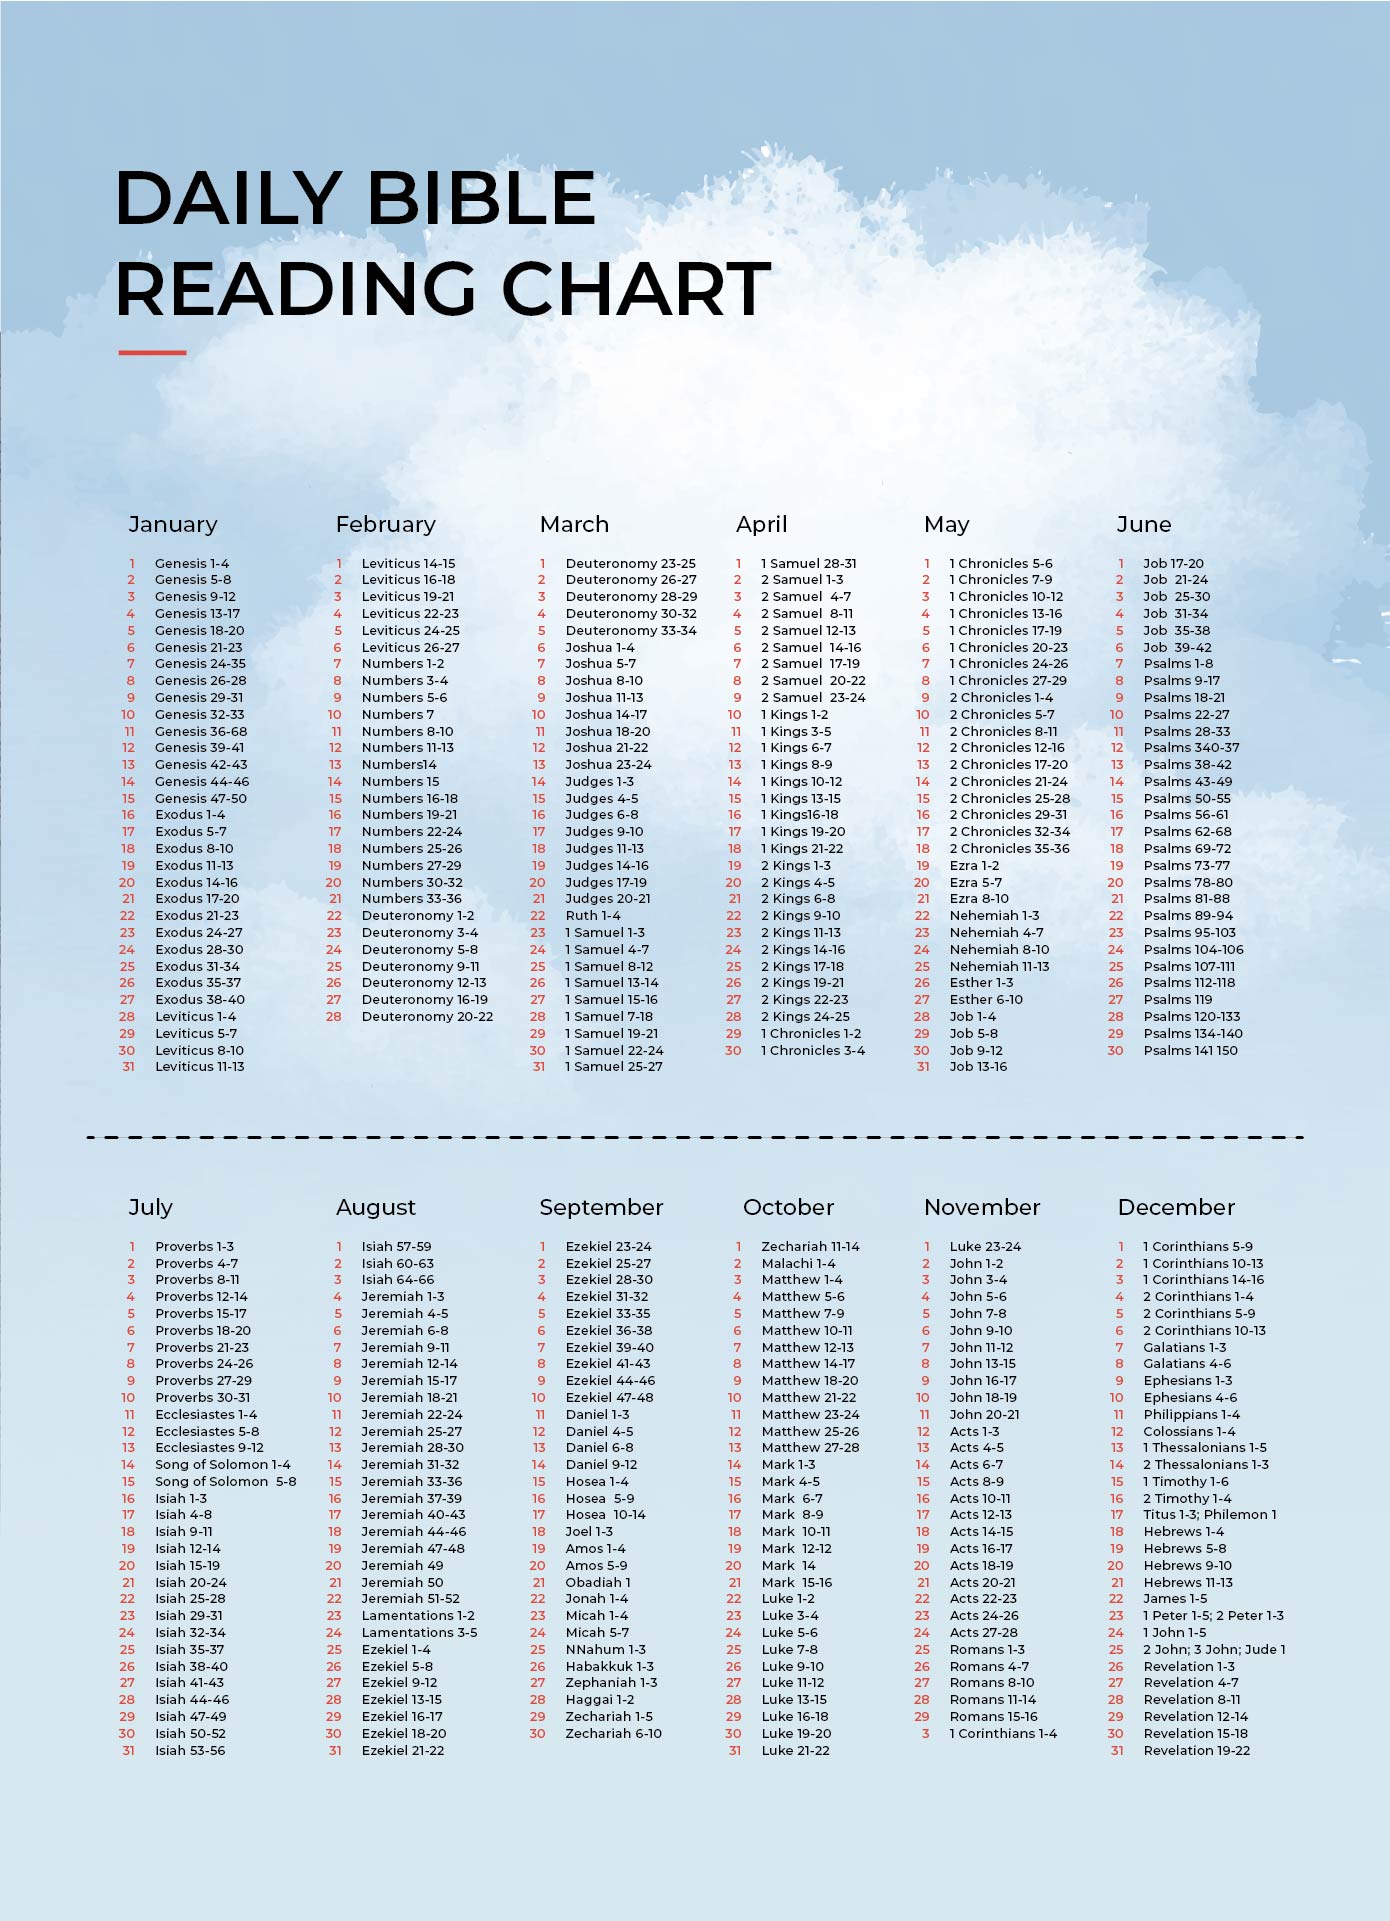 5-best-images-of-printable-bible-reading-guide-daily-bible-reading